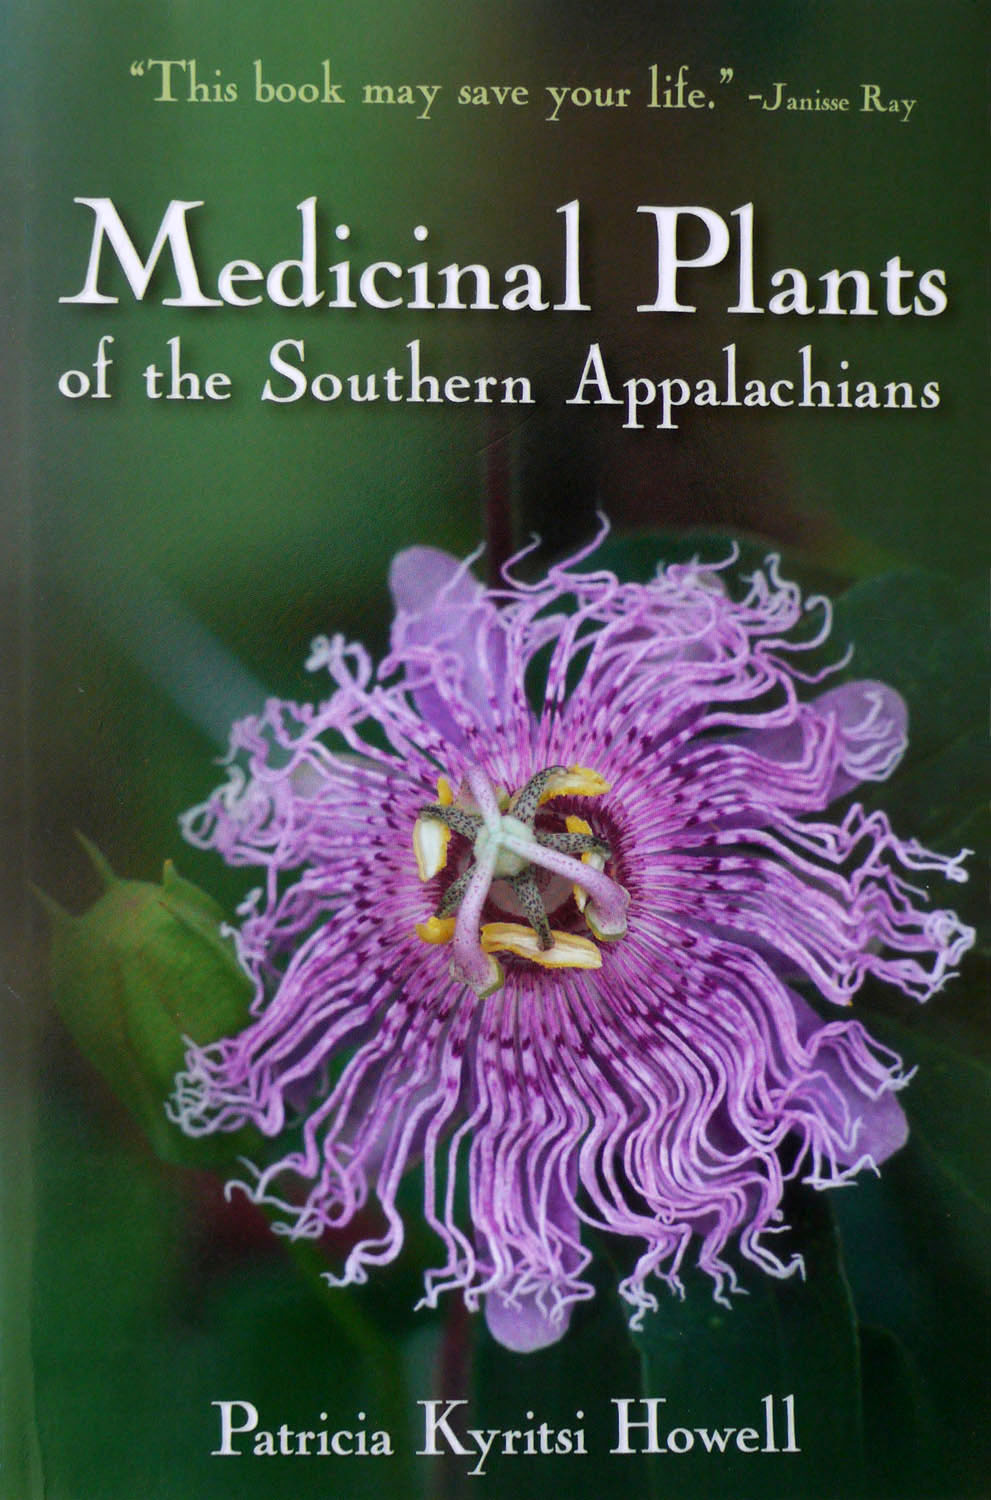 Medicinal-Plants-of-the-Southern-Appalachians-1